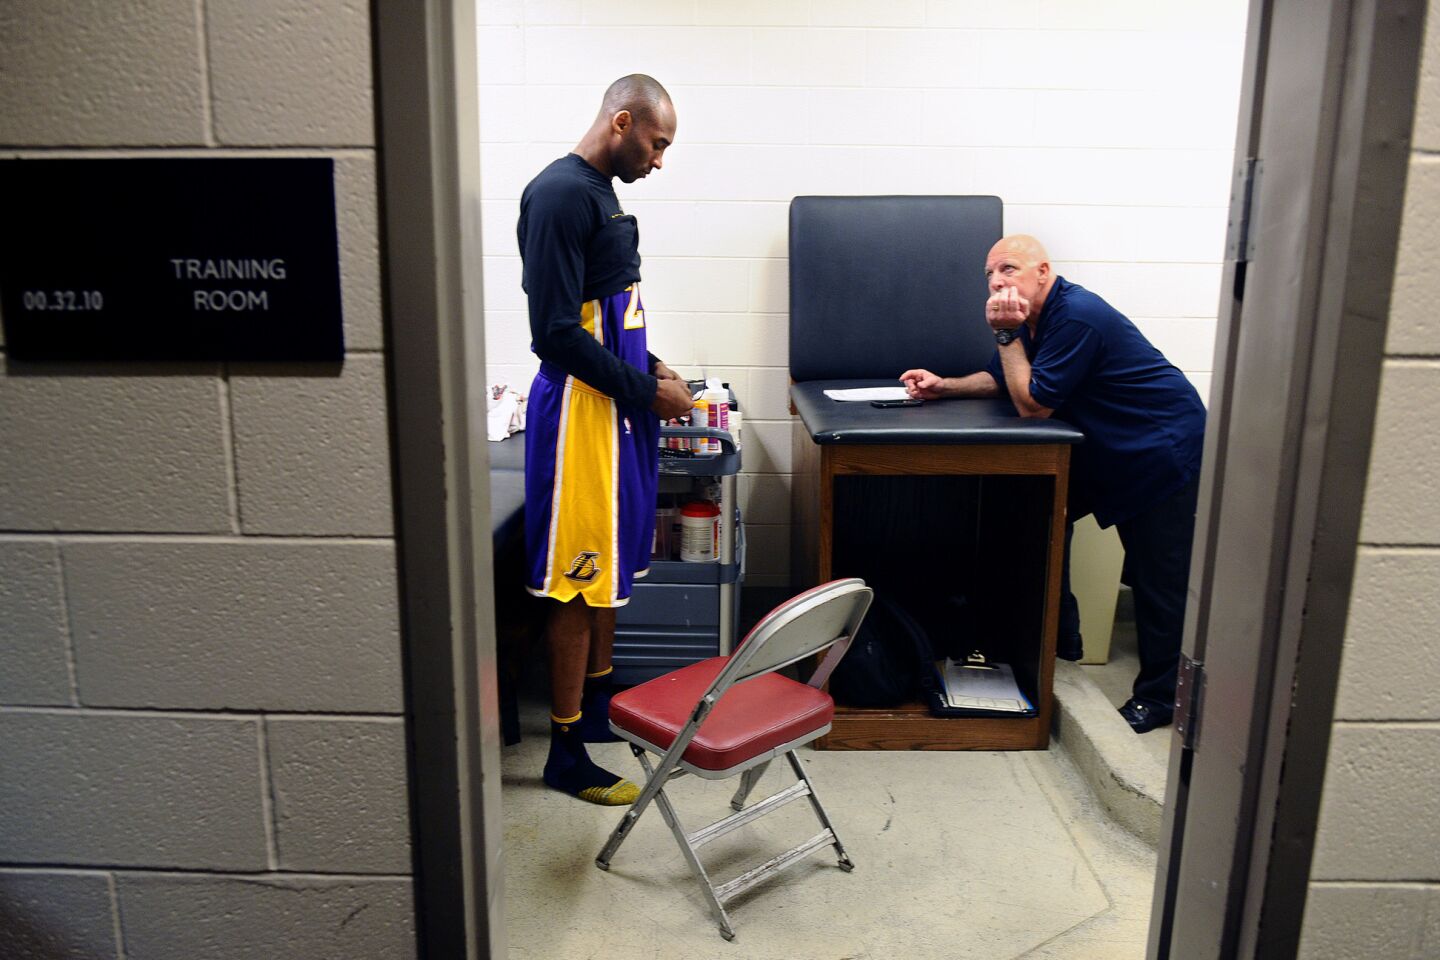 Kobe Bryant prepares for a game with the Rockets in the locker room as trainer Gary Vitti looks on in Houston.